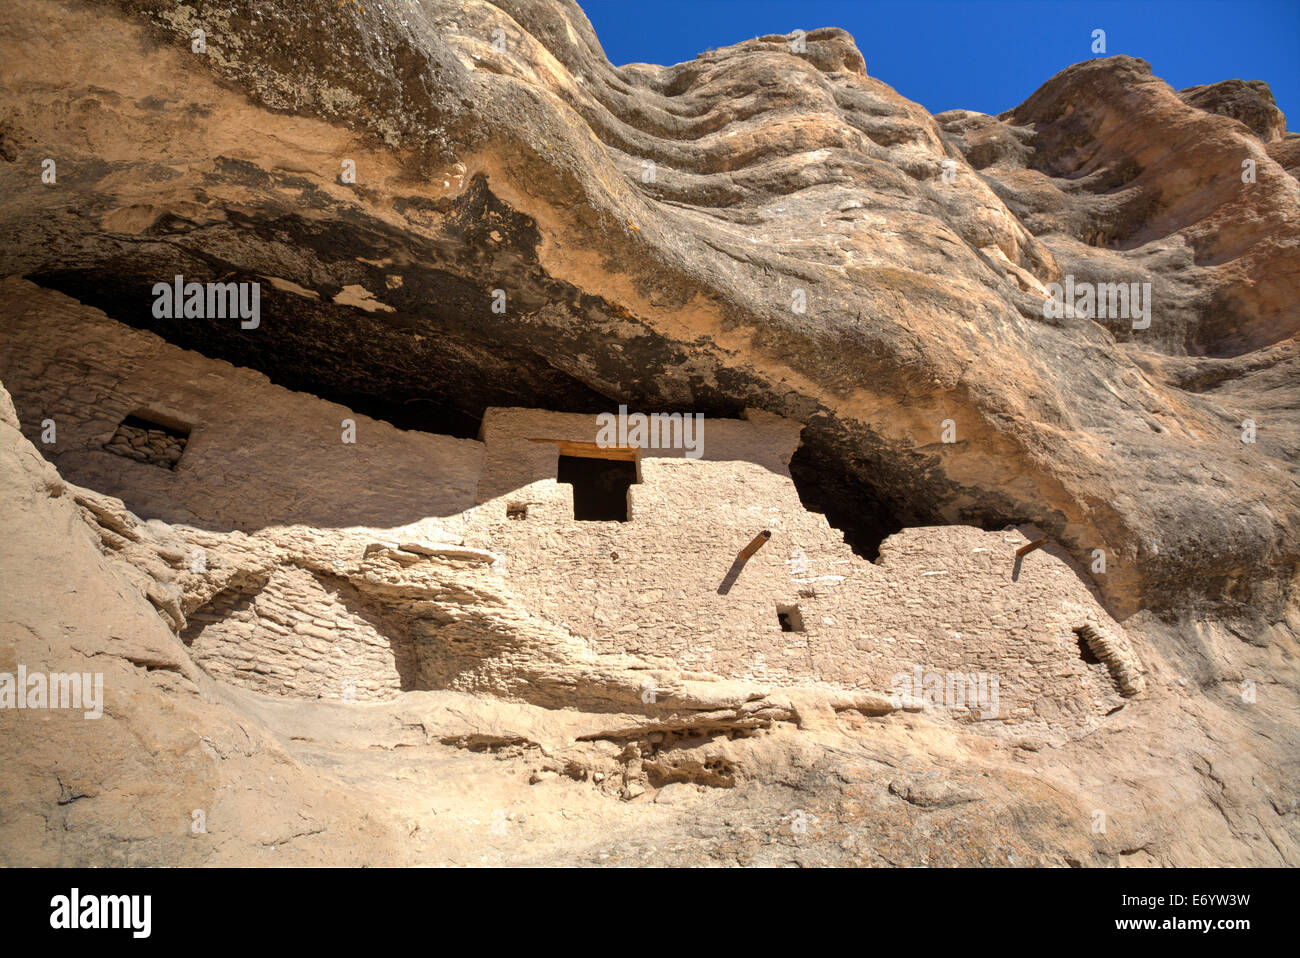 USA, New Mexico, Gila Cliff Dwellings National Monument, constructed over 700 years ago Stock Photo